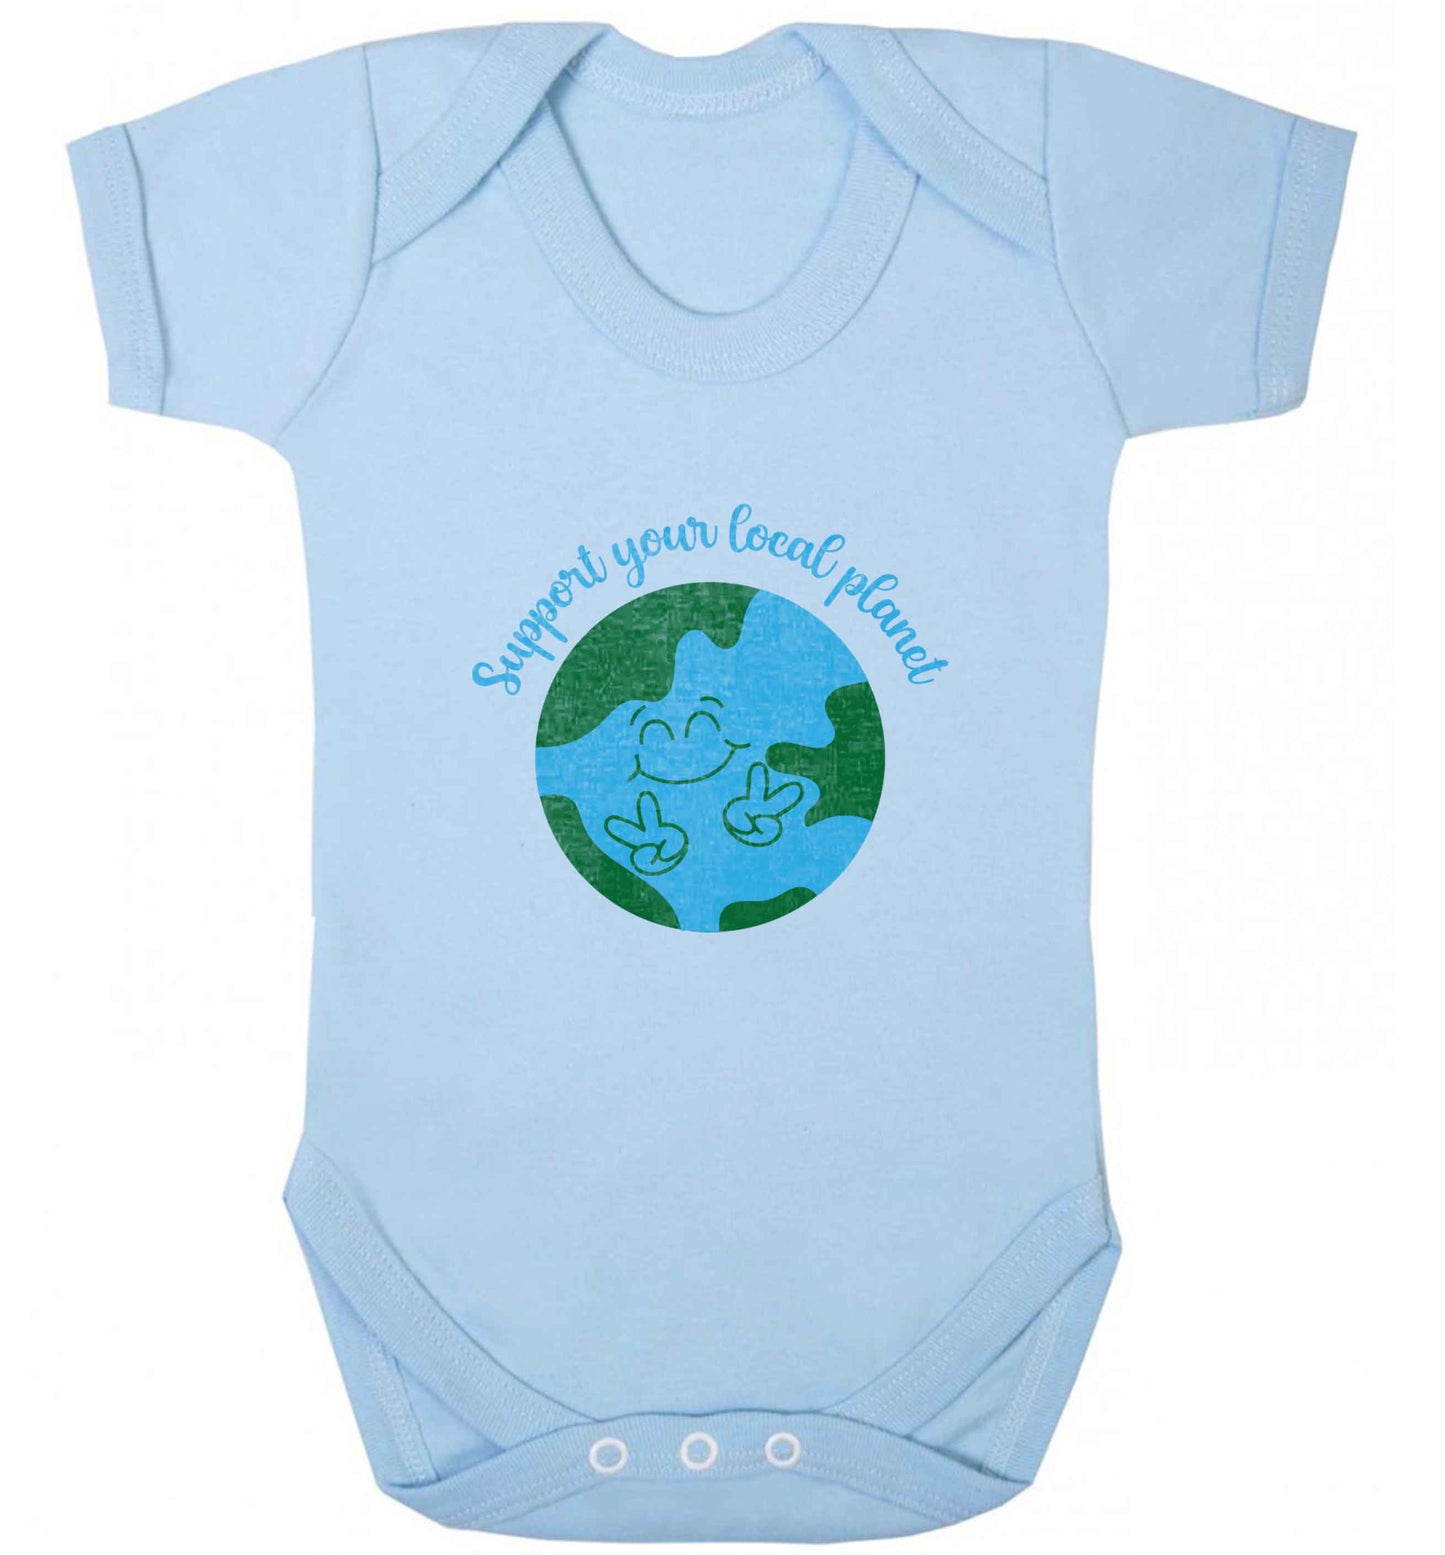 Support your local planet baby vest pale blue 18-24 months